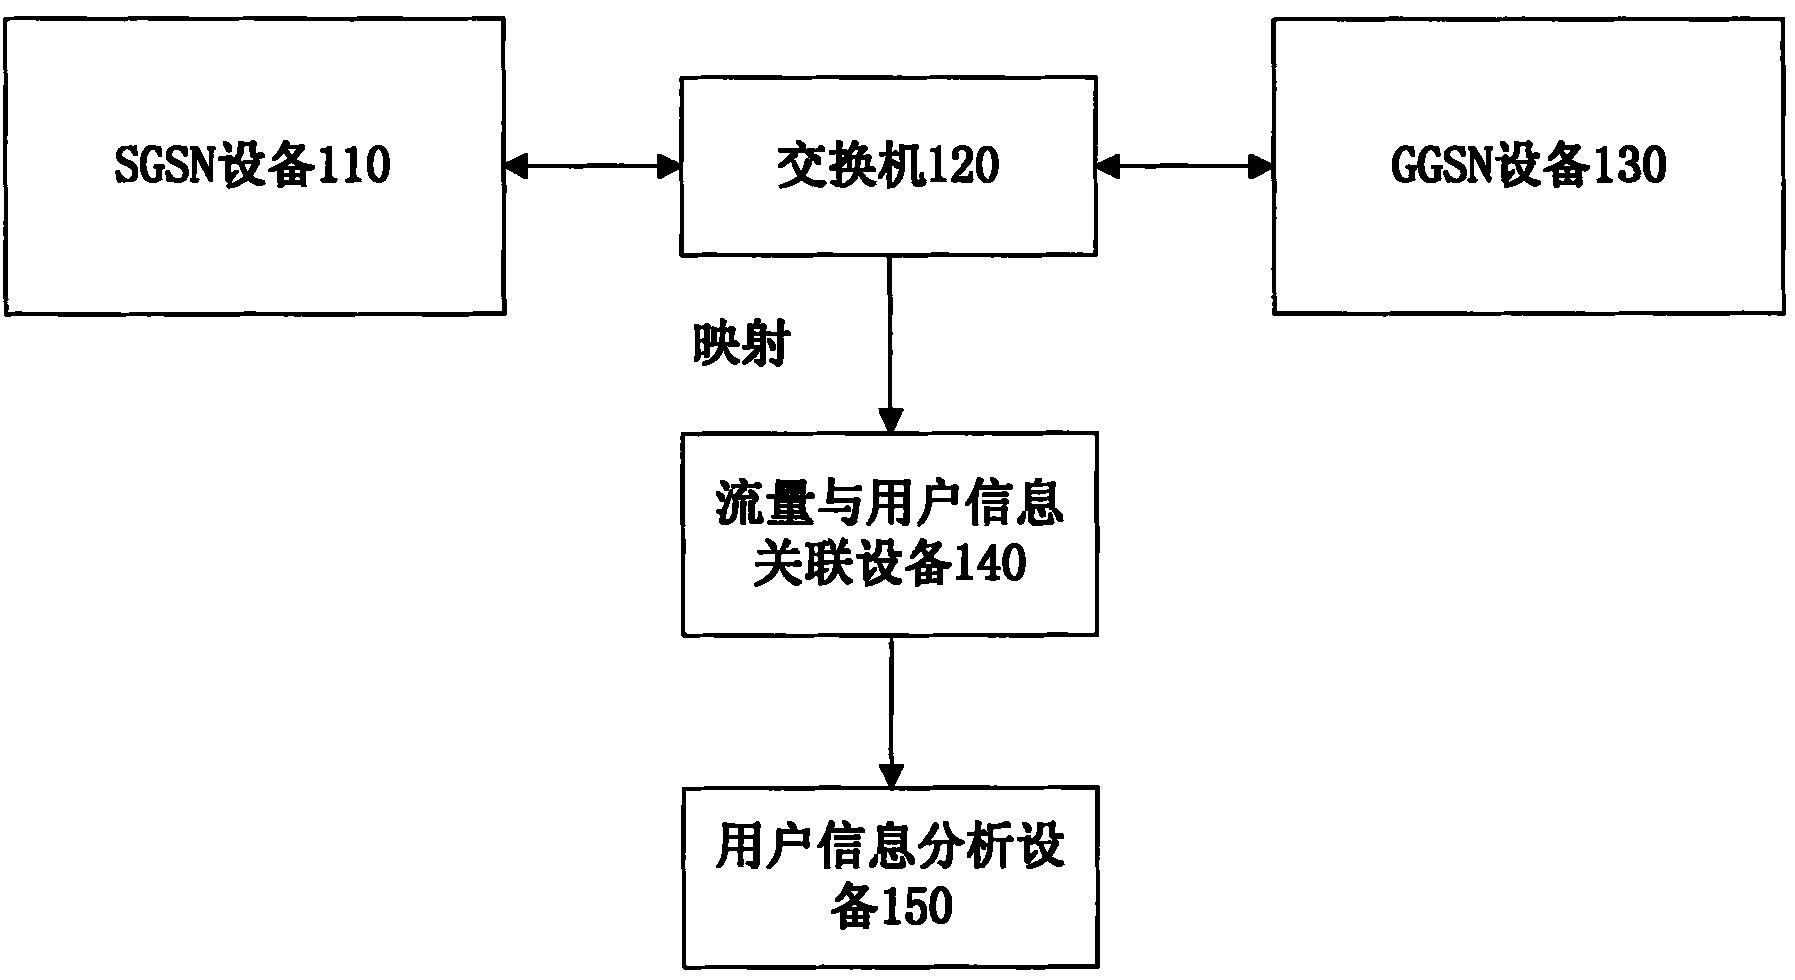 Method and system for correlating flow and user information in general packet radio service (GRPS) network